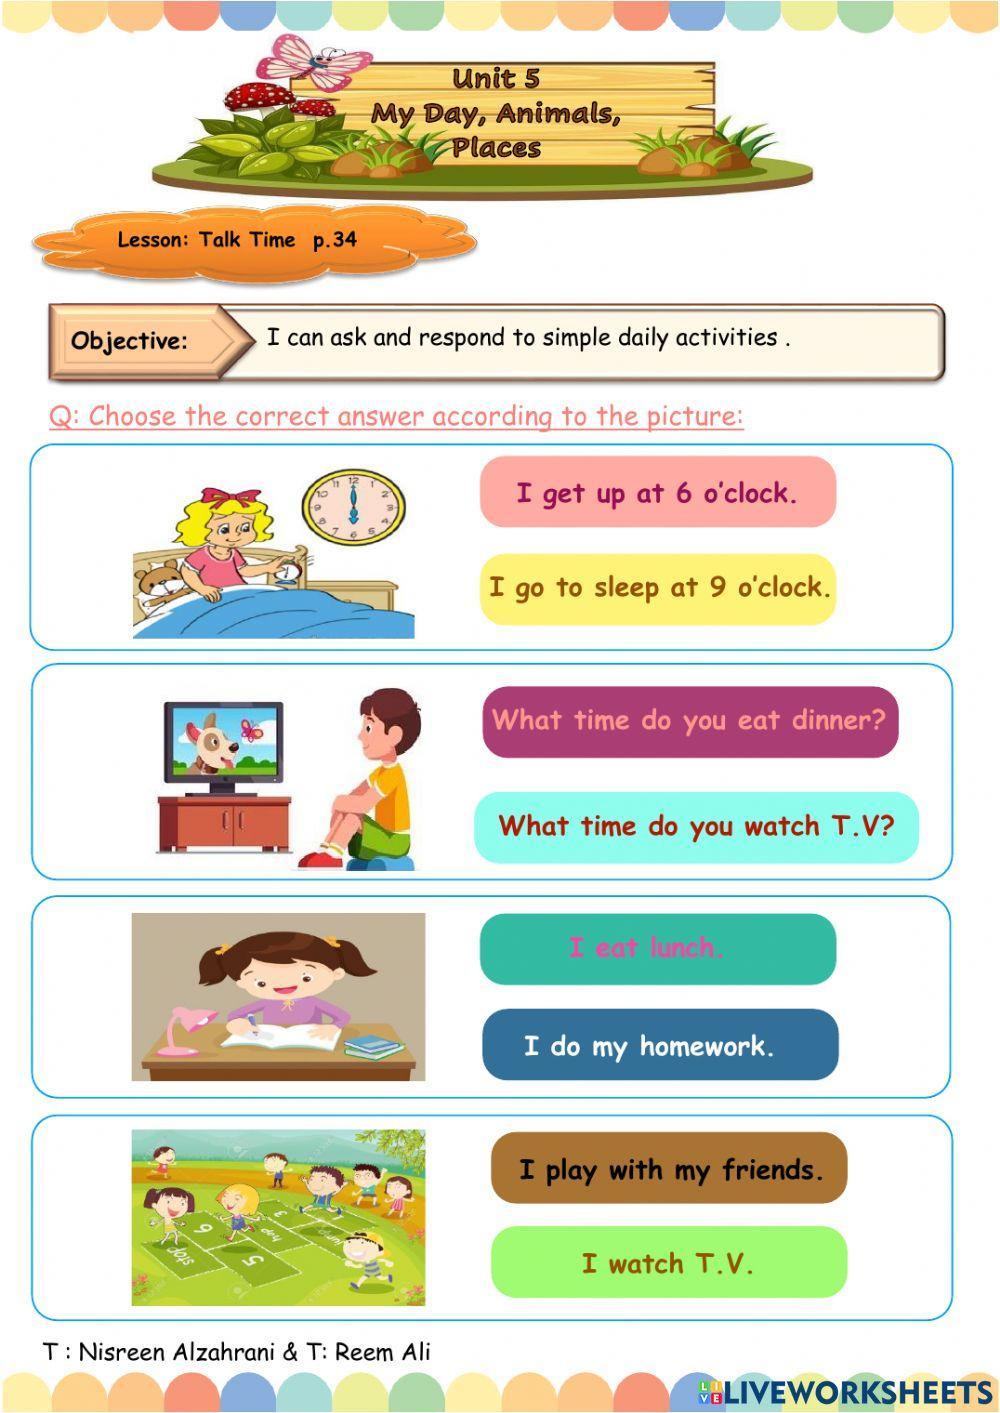 WC4 U5 L1 I can ask and respond to simple daily activities.